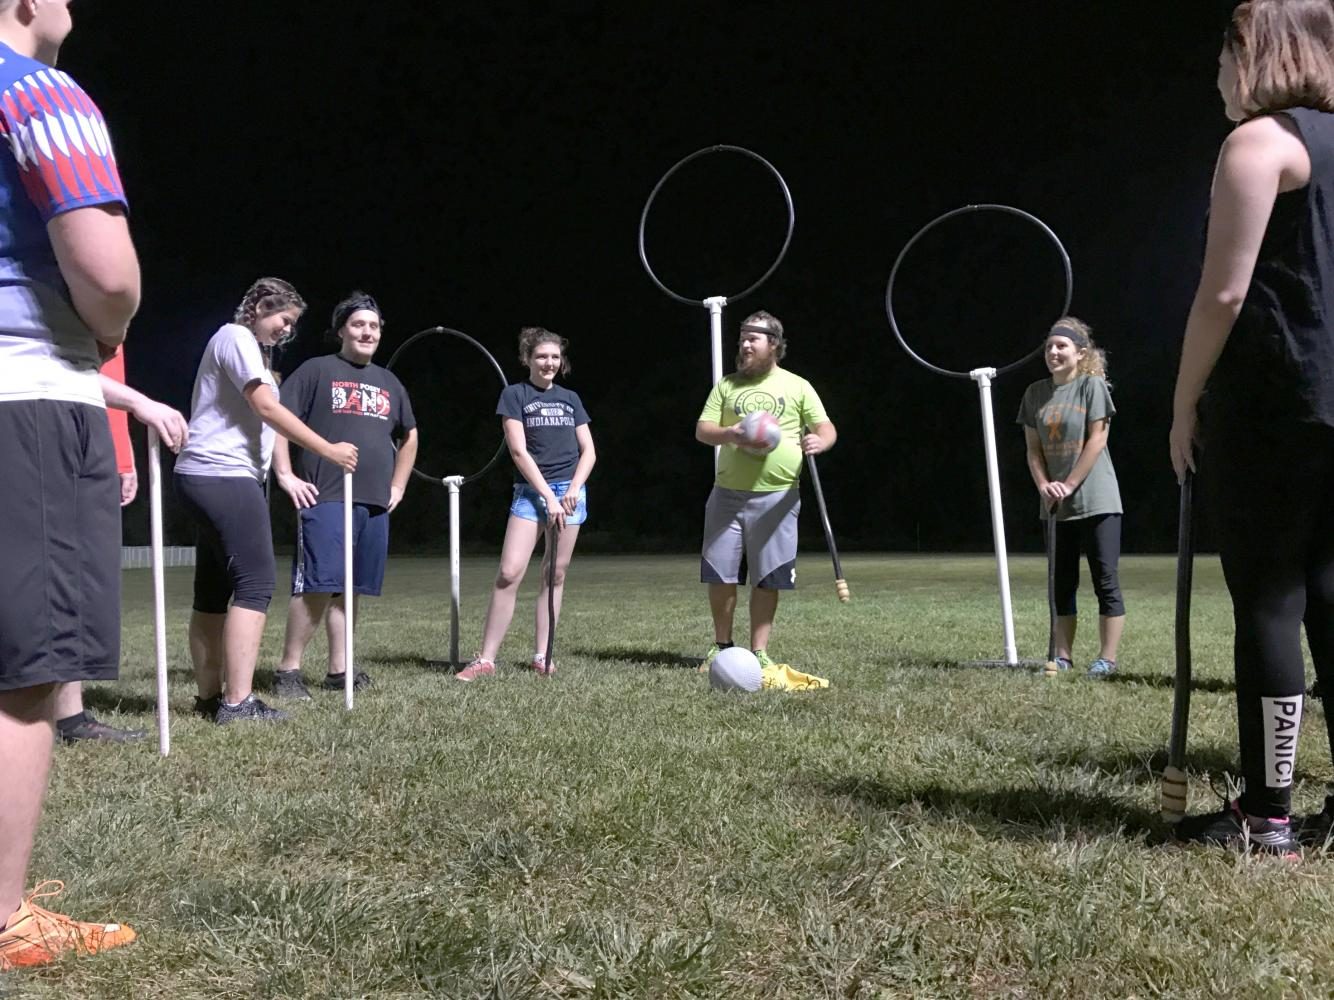 University alumnus Cole Musgrave, center, coach of the Quidditch team, goes over the rules of the game with new team members during the first practice of the year at the University of Southern Indiana (USI), Aug. 31, 2017. Quidditch is a sport created by author J.K. Rowling in the popular ‘Harry Potter’ book series. USI adopted the sport in 2011 by Amber Lynn-Seibert and Lauren Maurer.